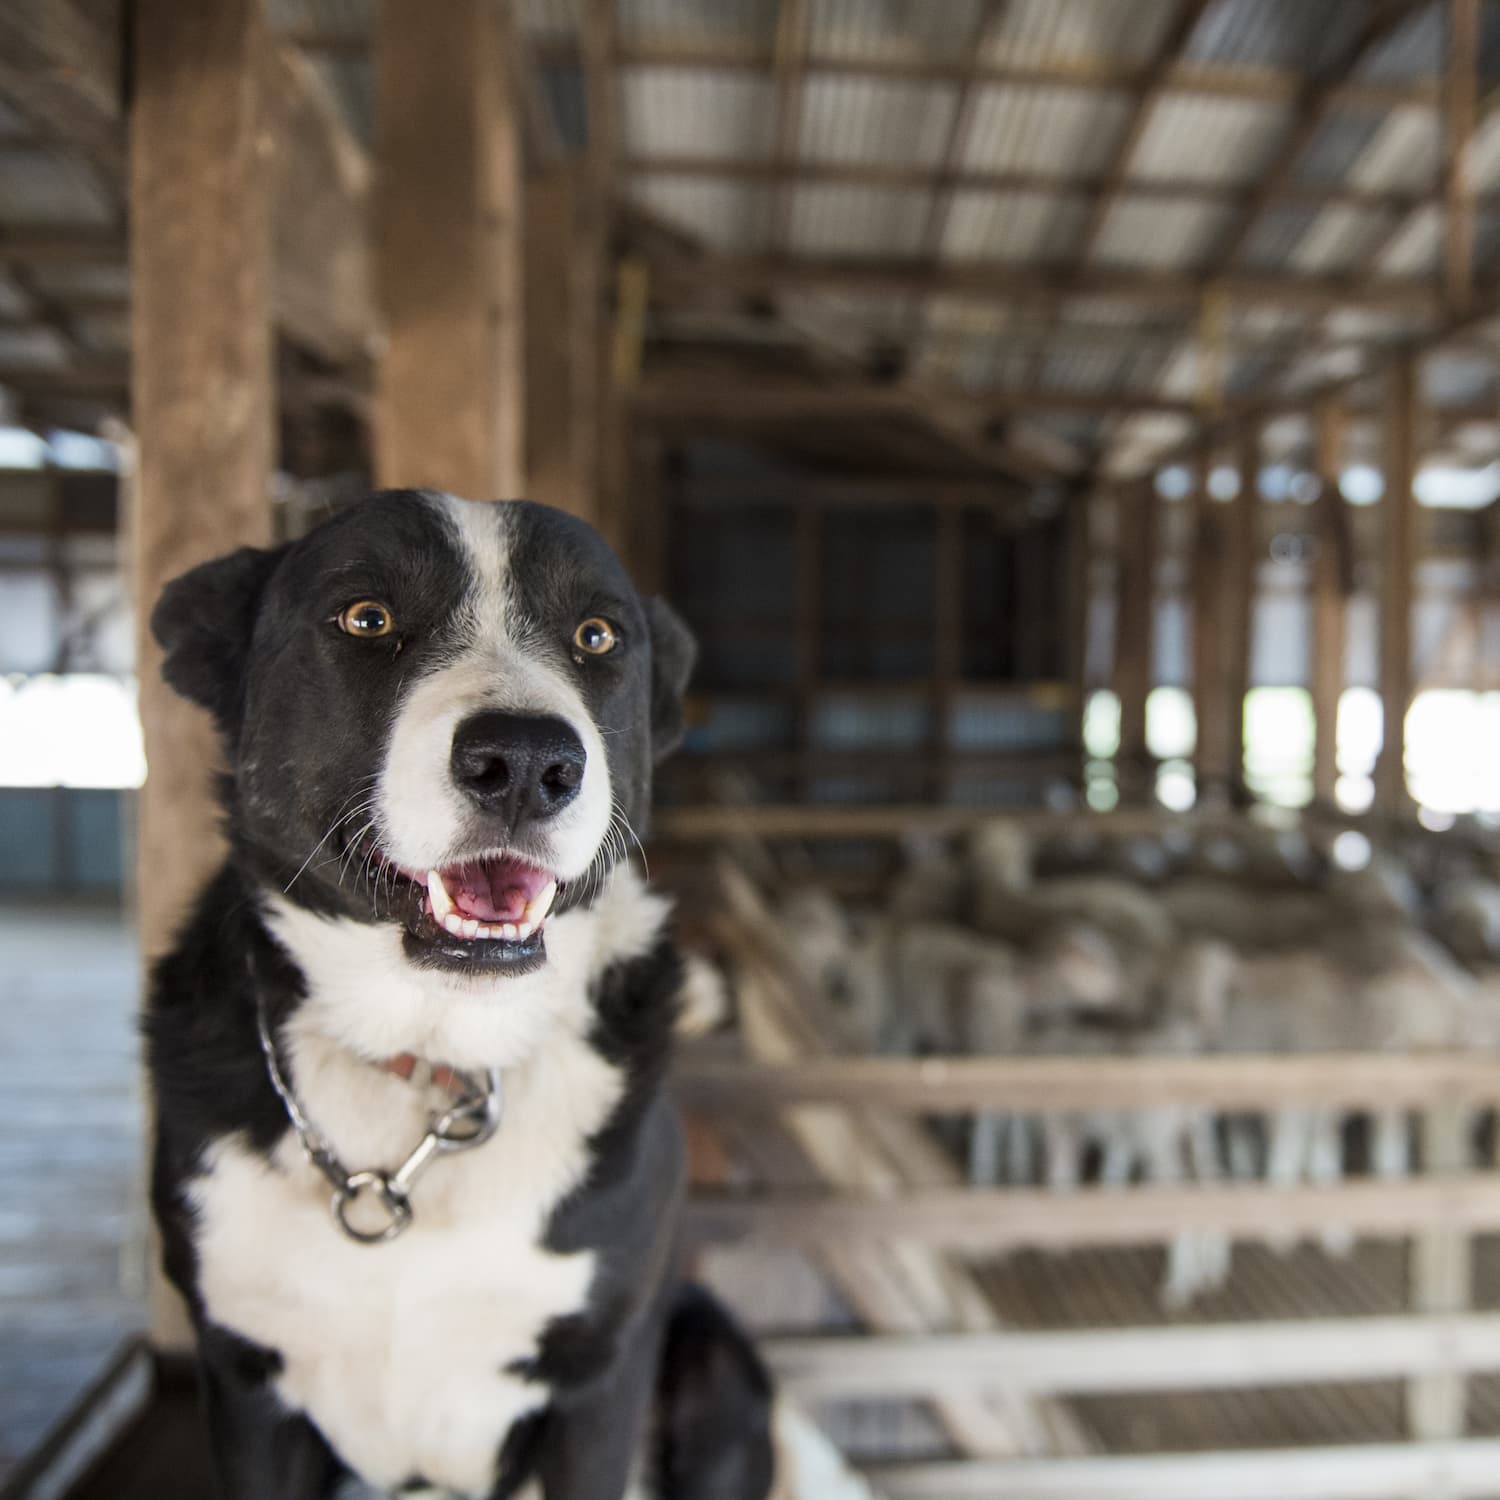 Black and white cattle dog in shearing shed